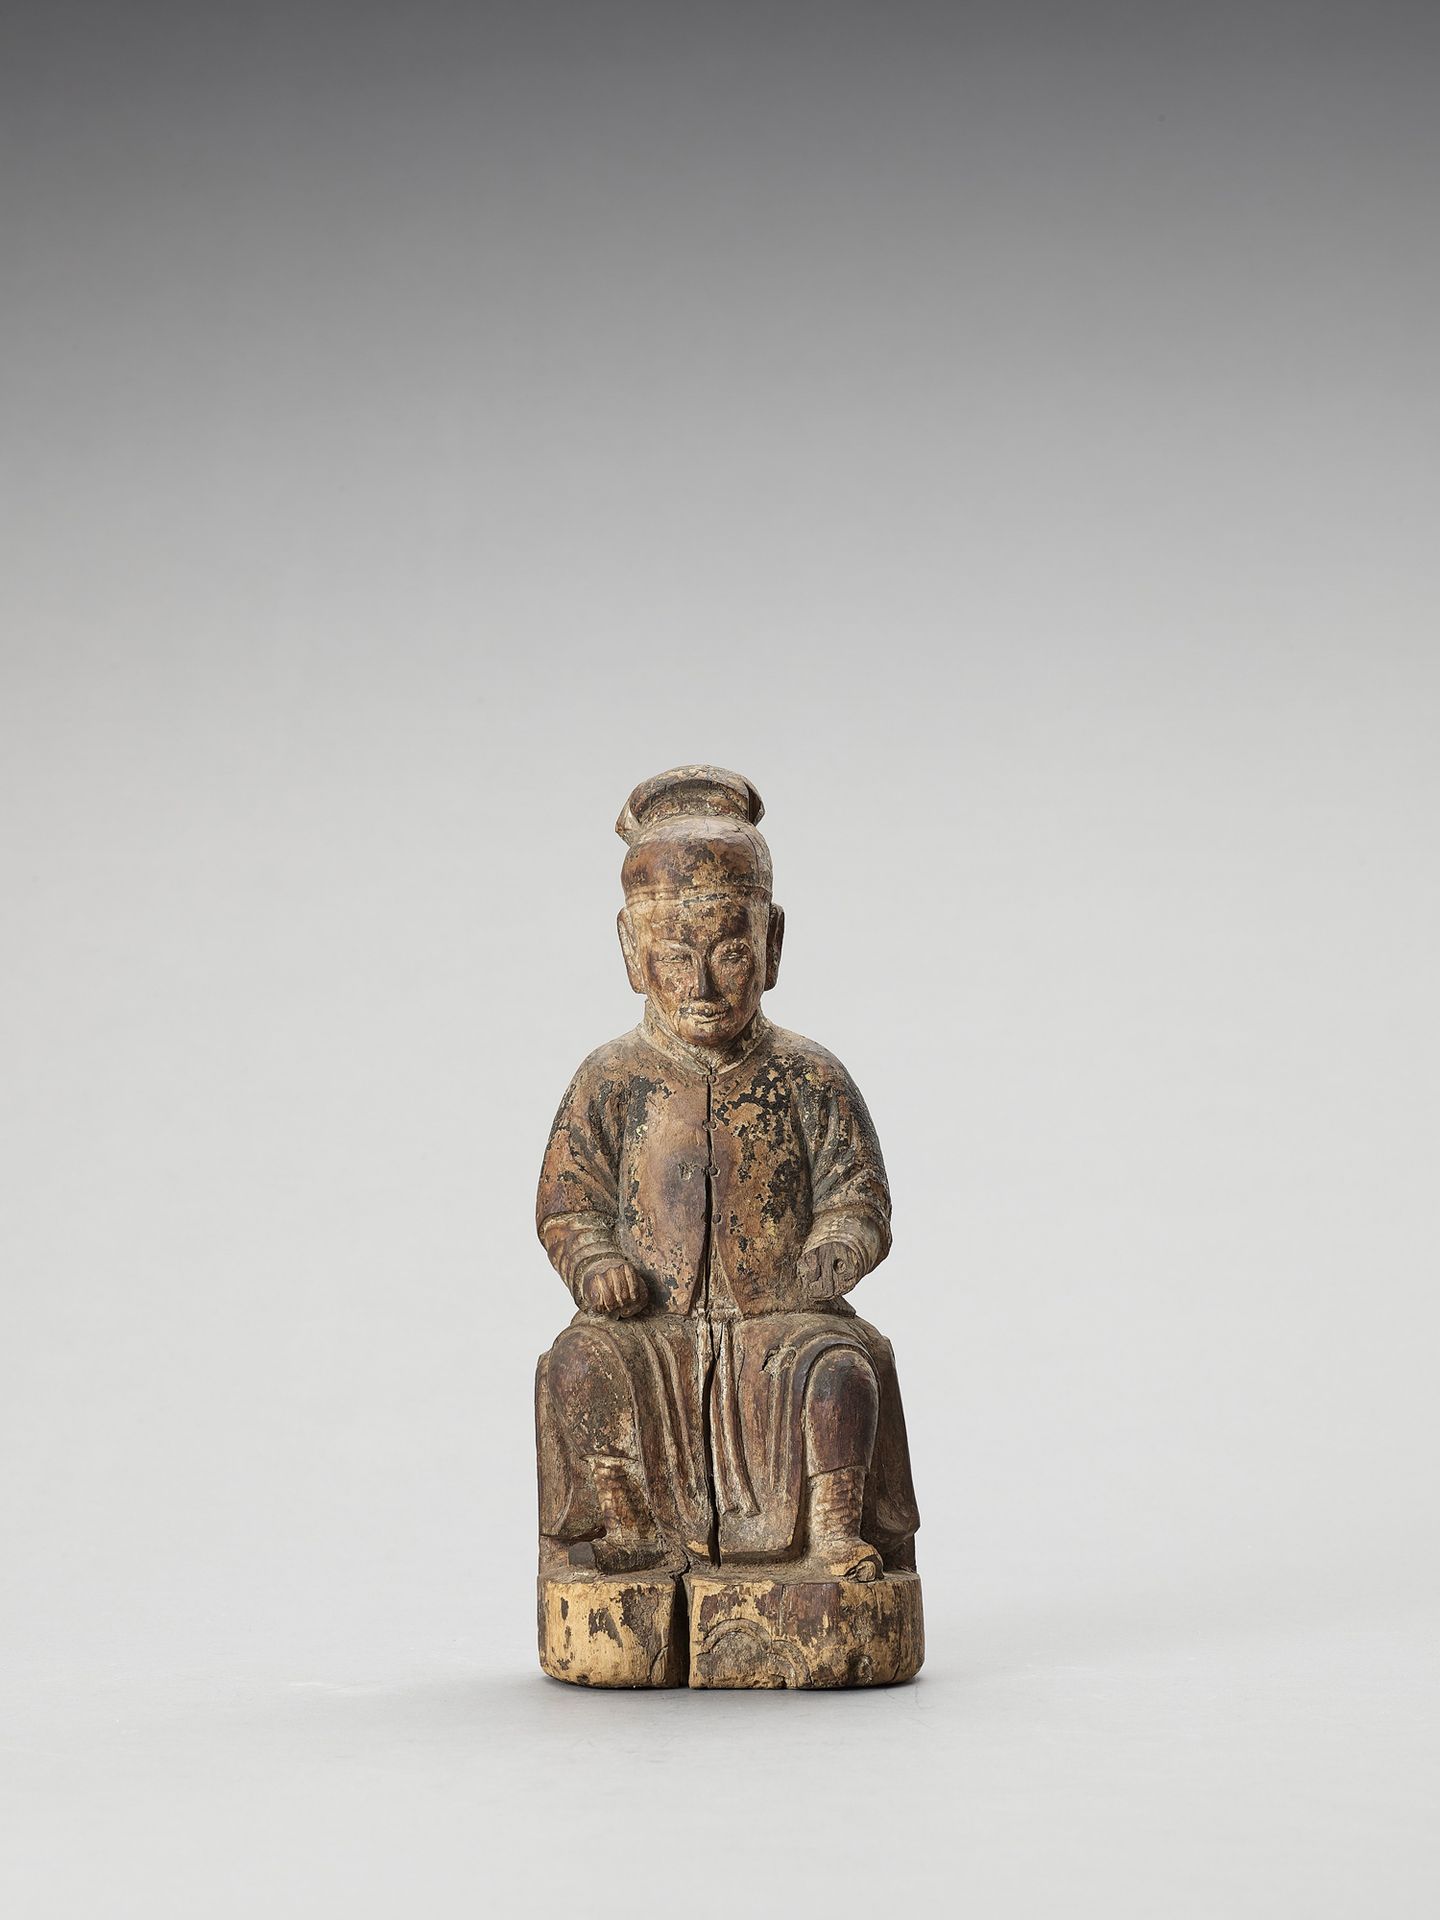 A WOOD FIGURE OF A DIGNITARY, MING HOLZFIGUR EINES WÜRDIGERS, MING
China, Ming-D&hellip;